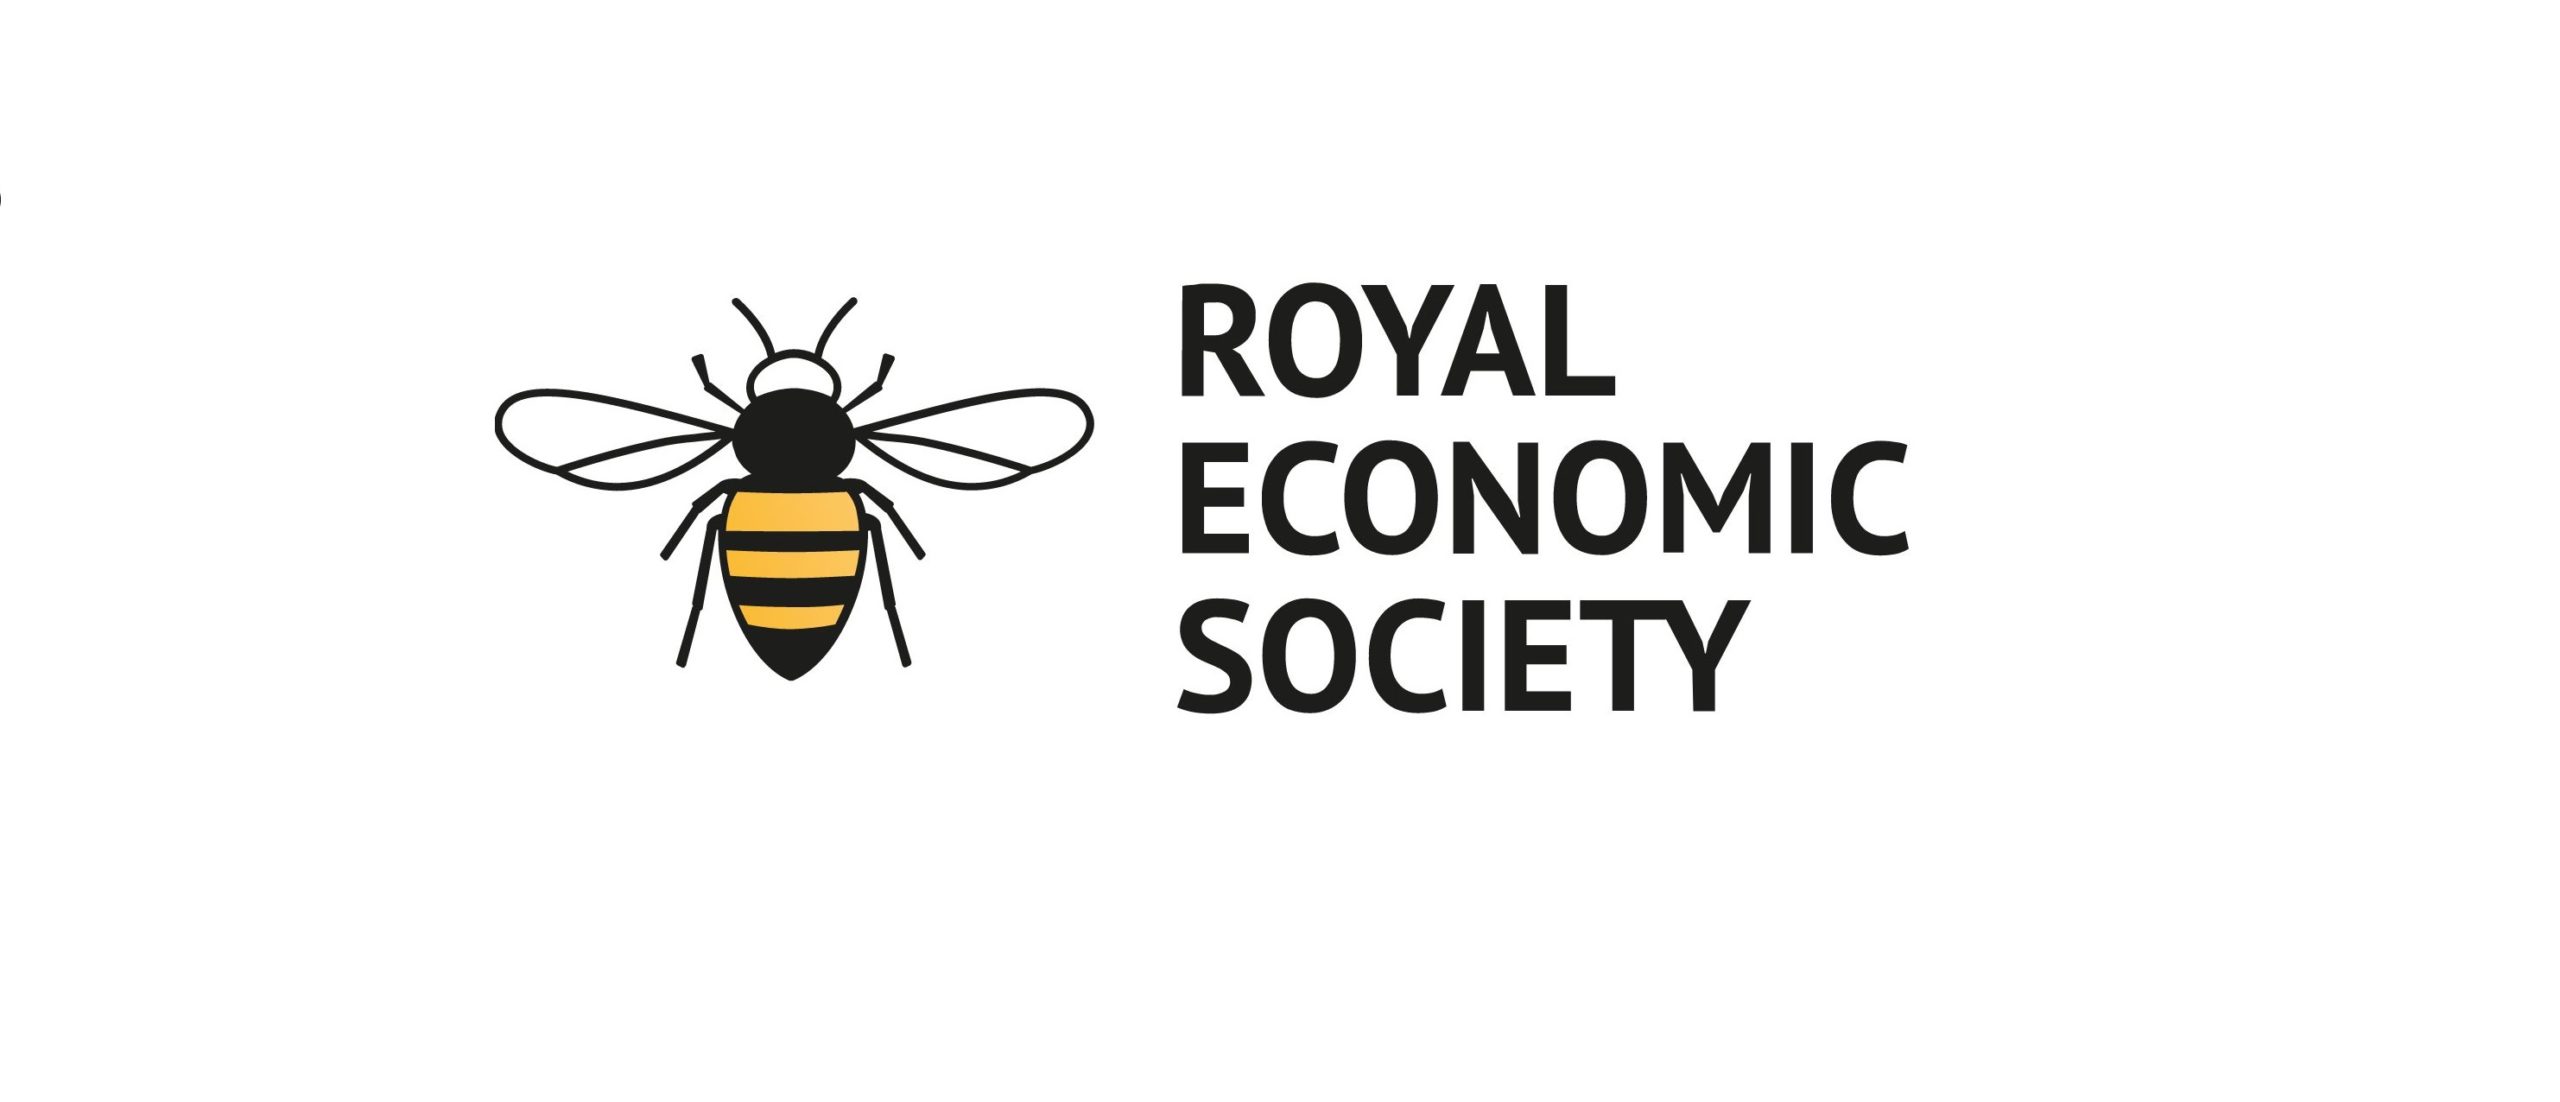 NEW: Royal Economic Society (RES) Conference 2022, 11-13 April 2022